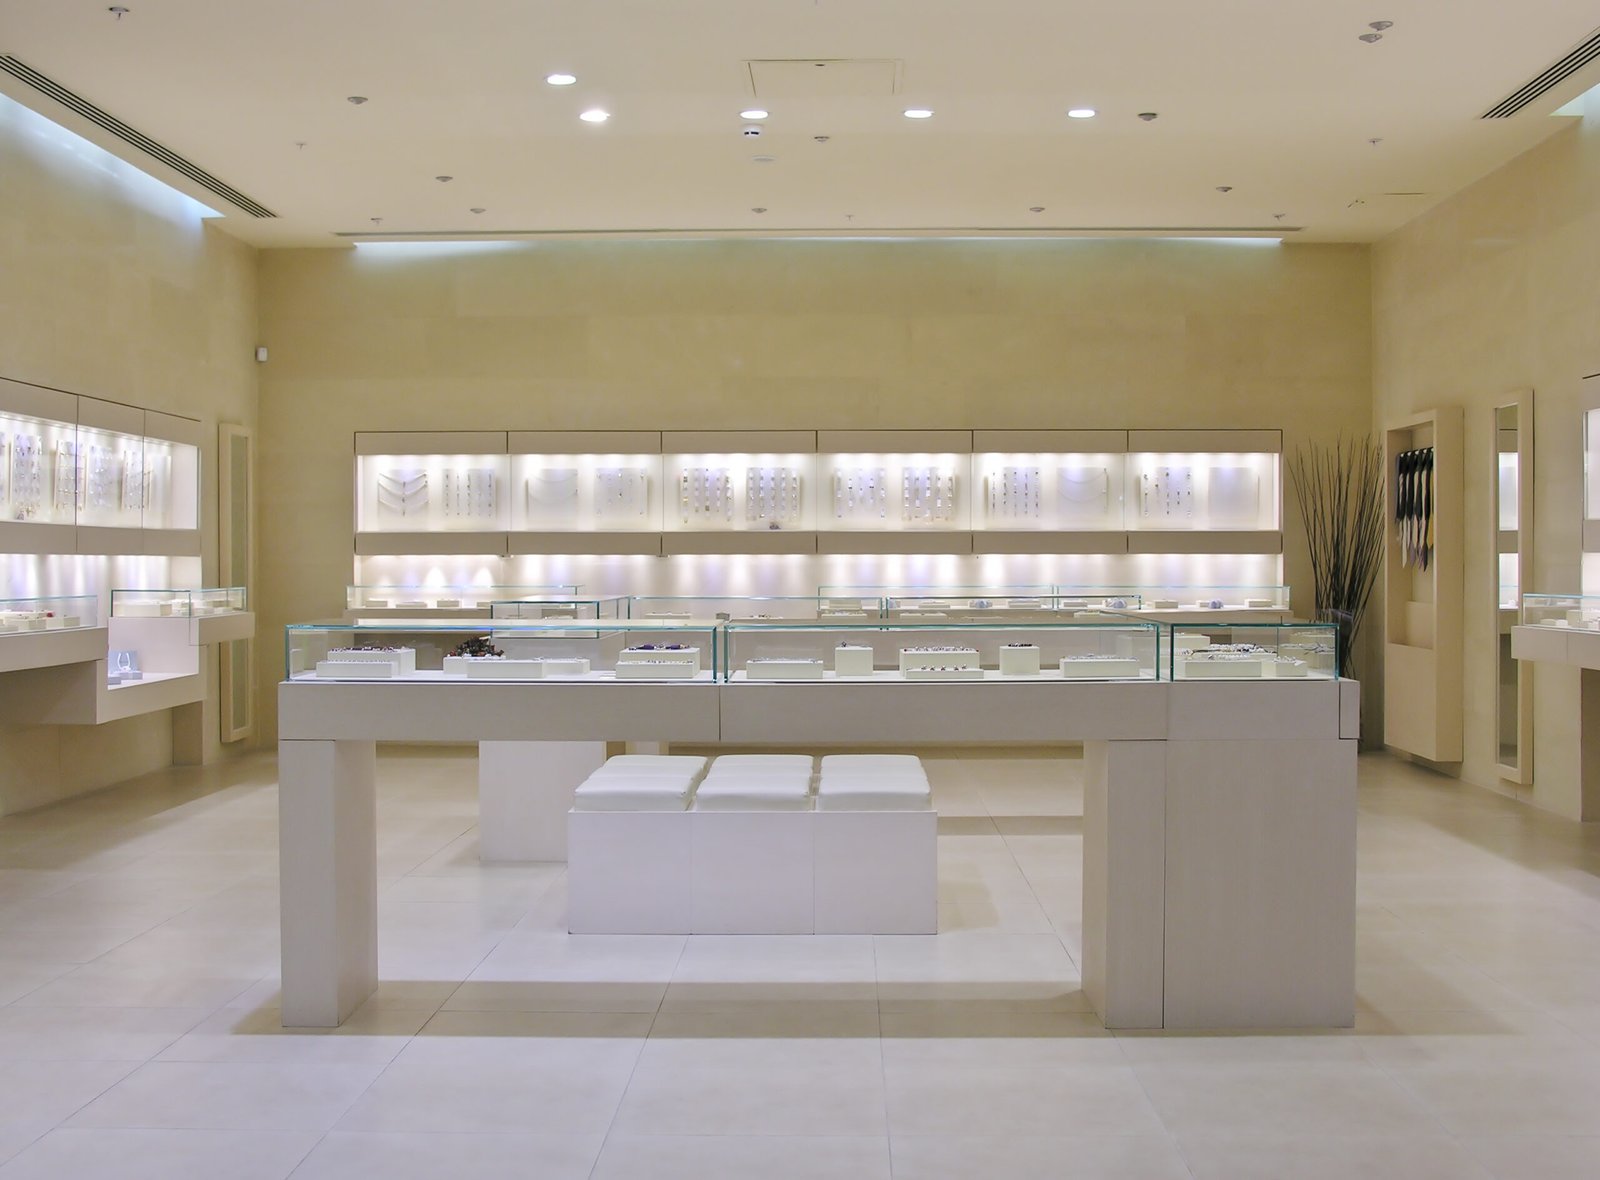 protection film on counters in jewelry store.